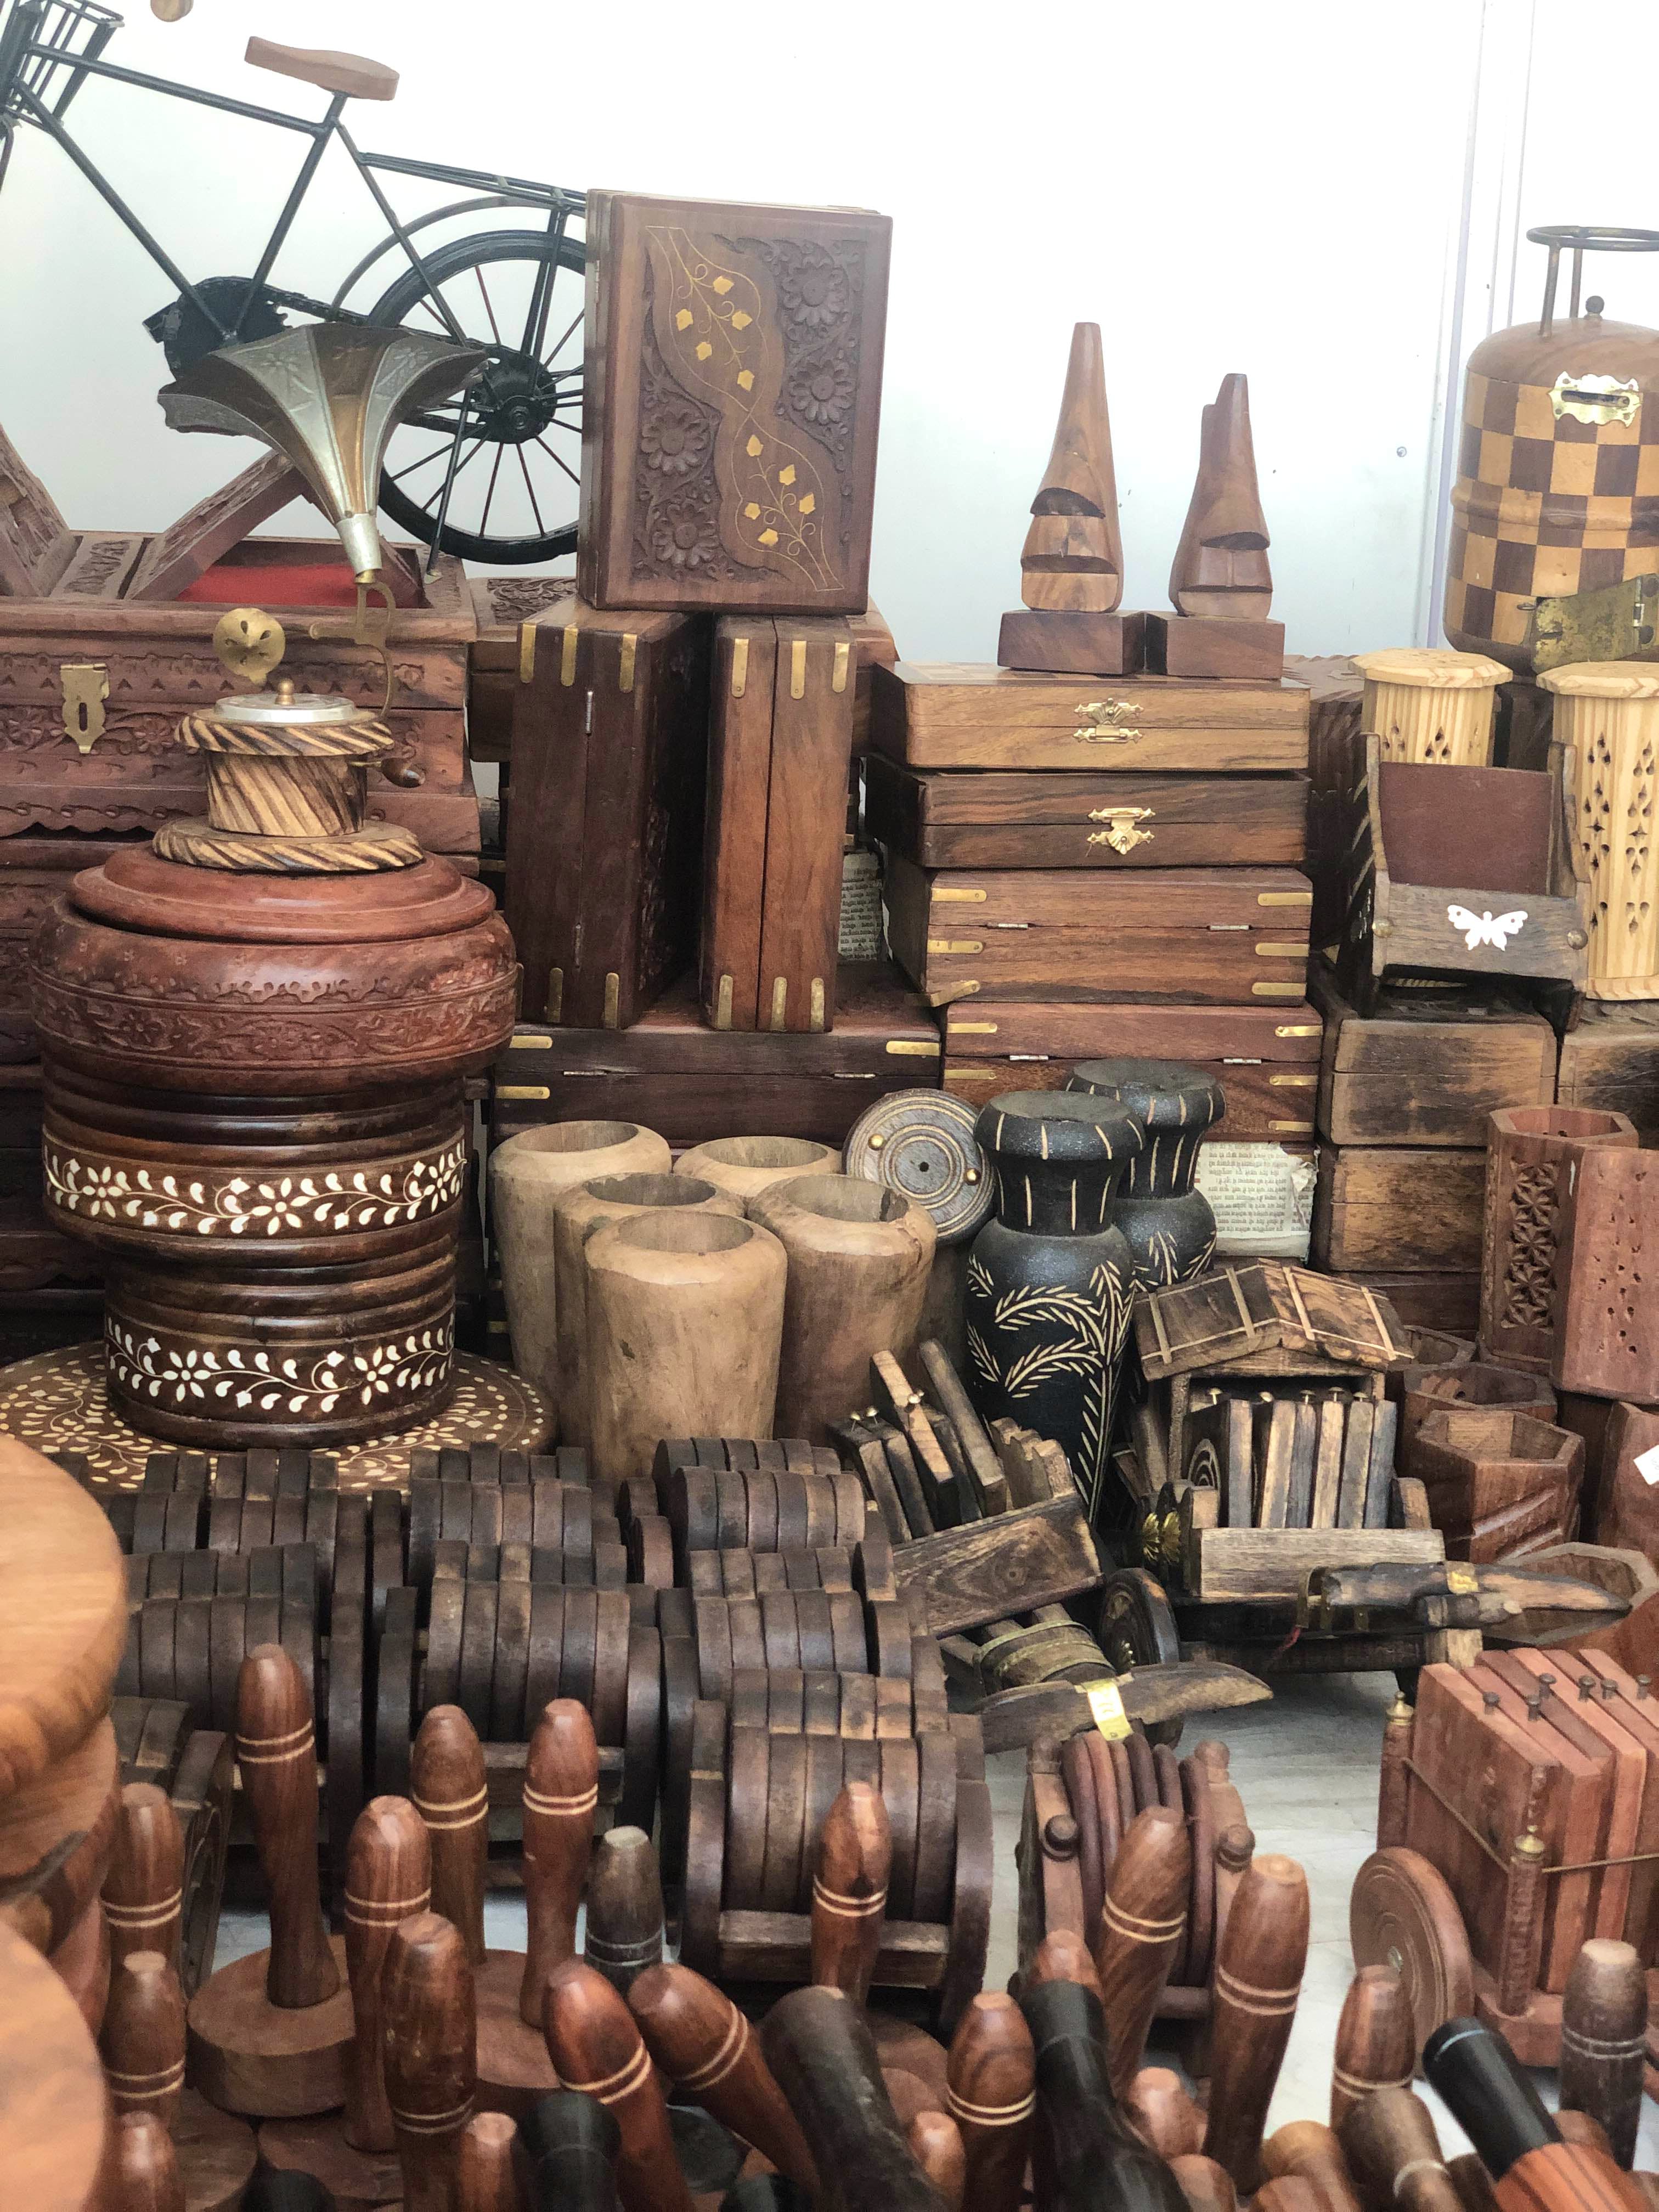 Wood,Collection,Antique,City,Games,Ancient history,Art